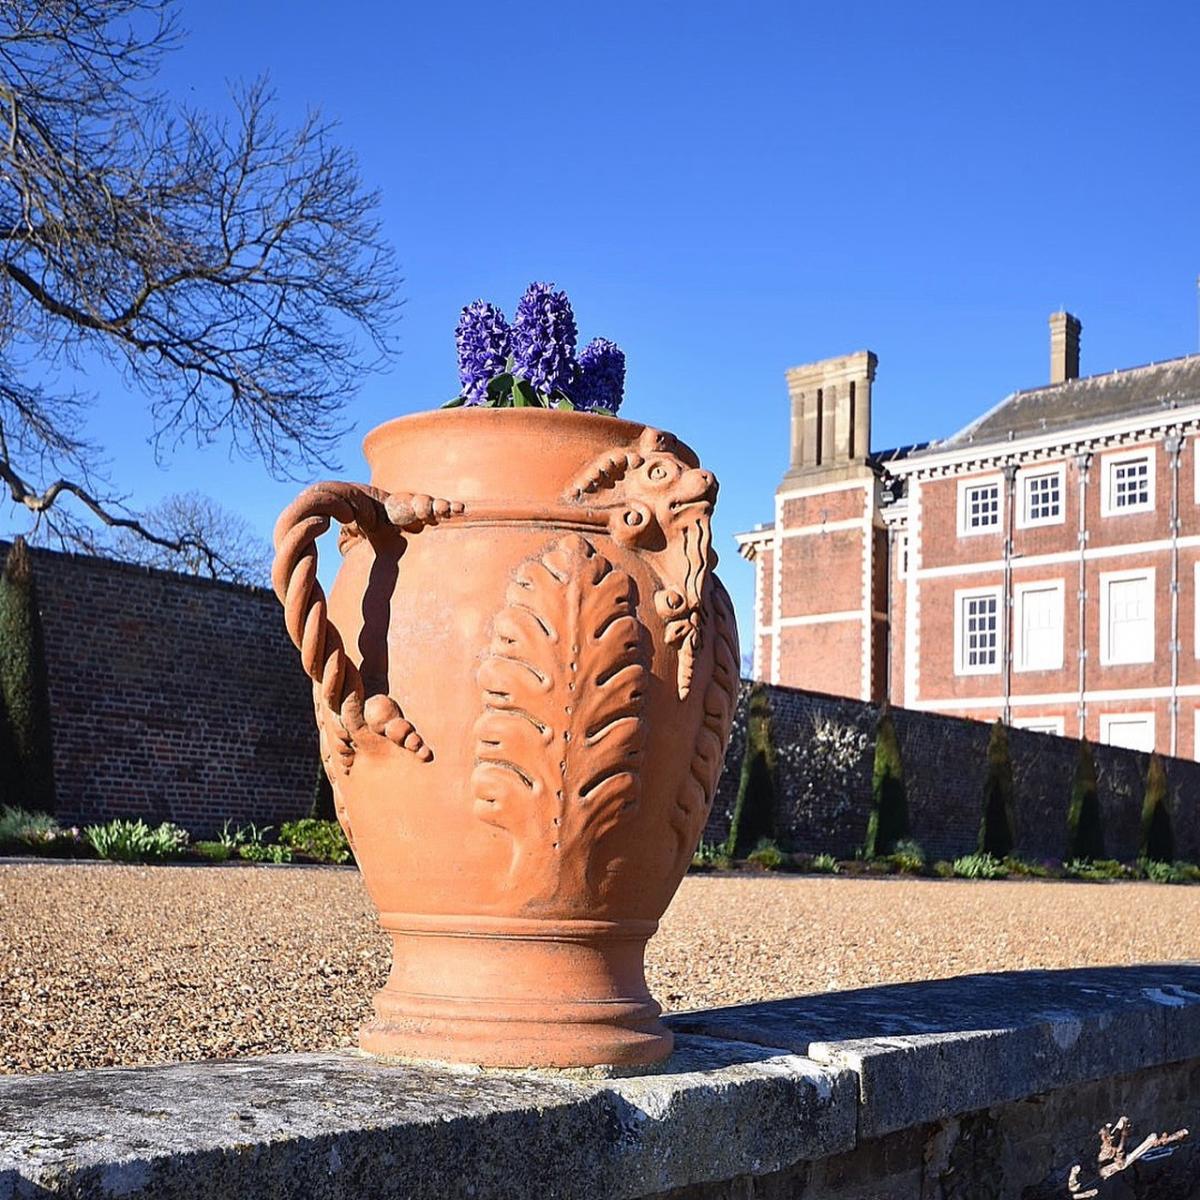 Kate Bertaut took this photo of a large potted plant at Ham House in the sunshine